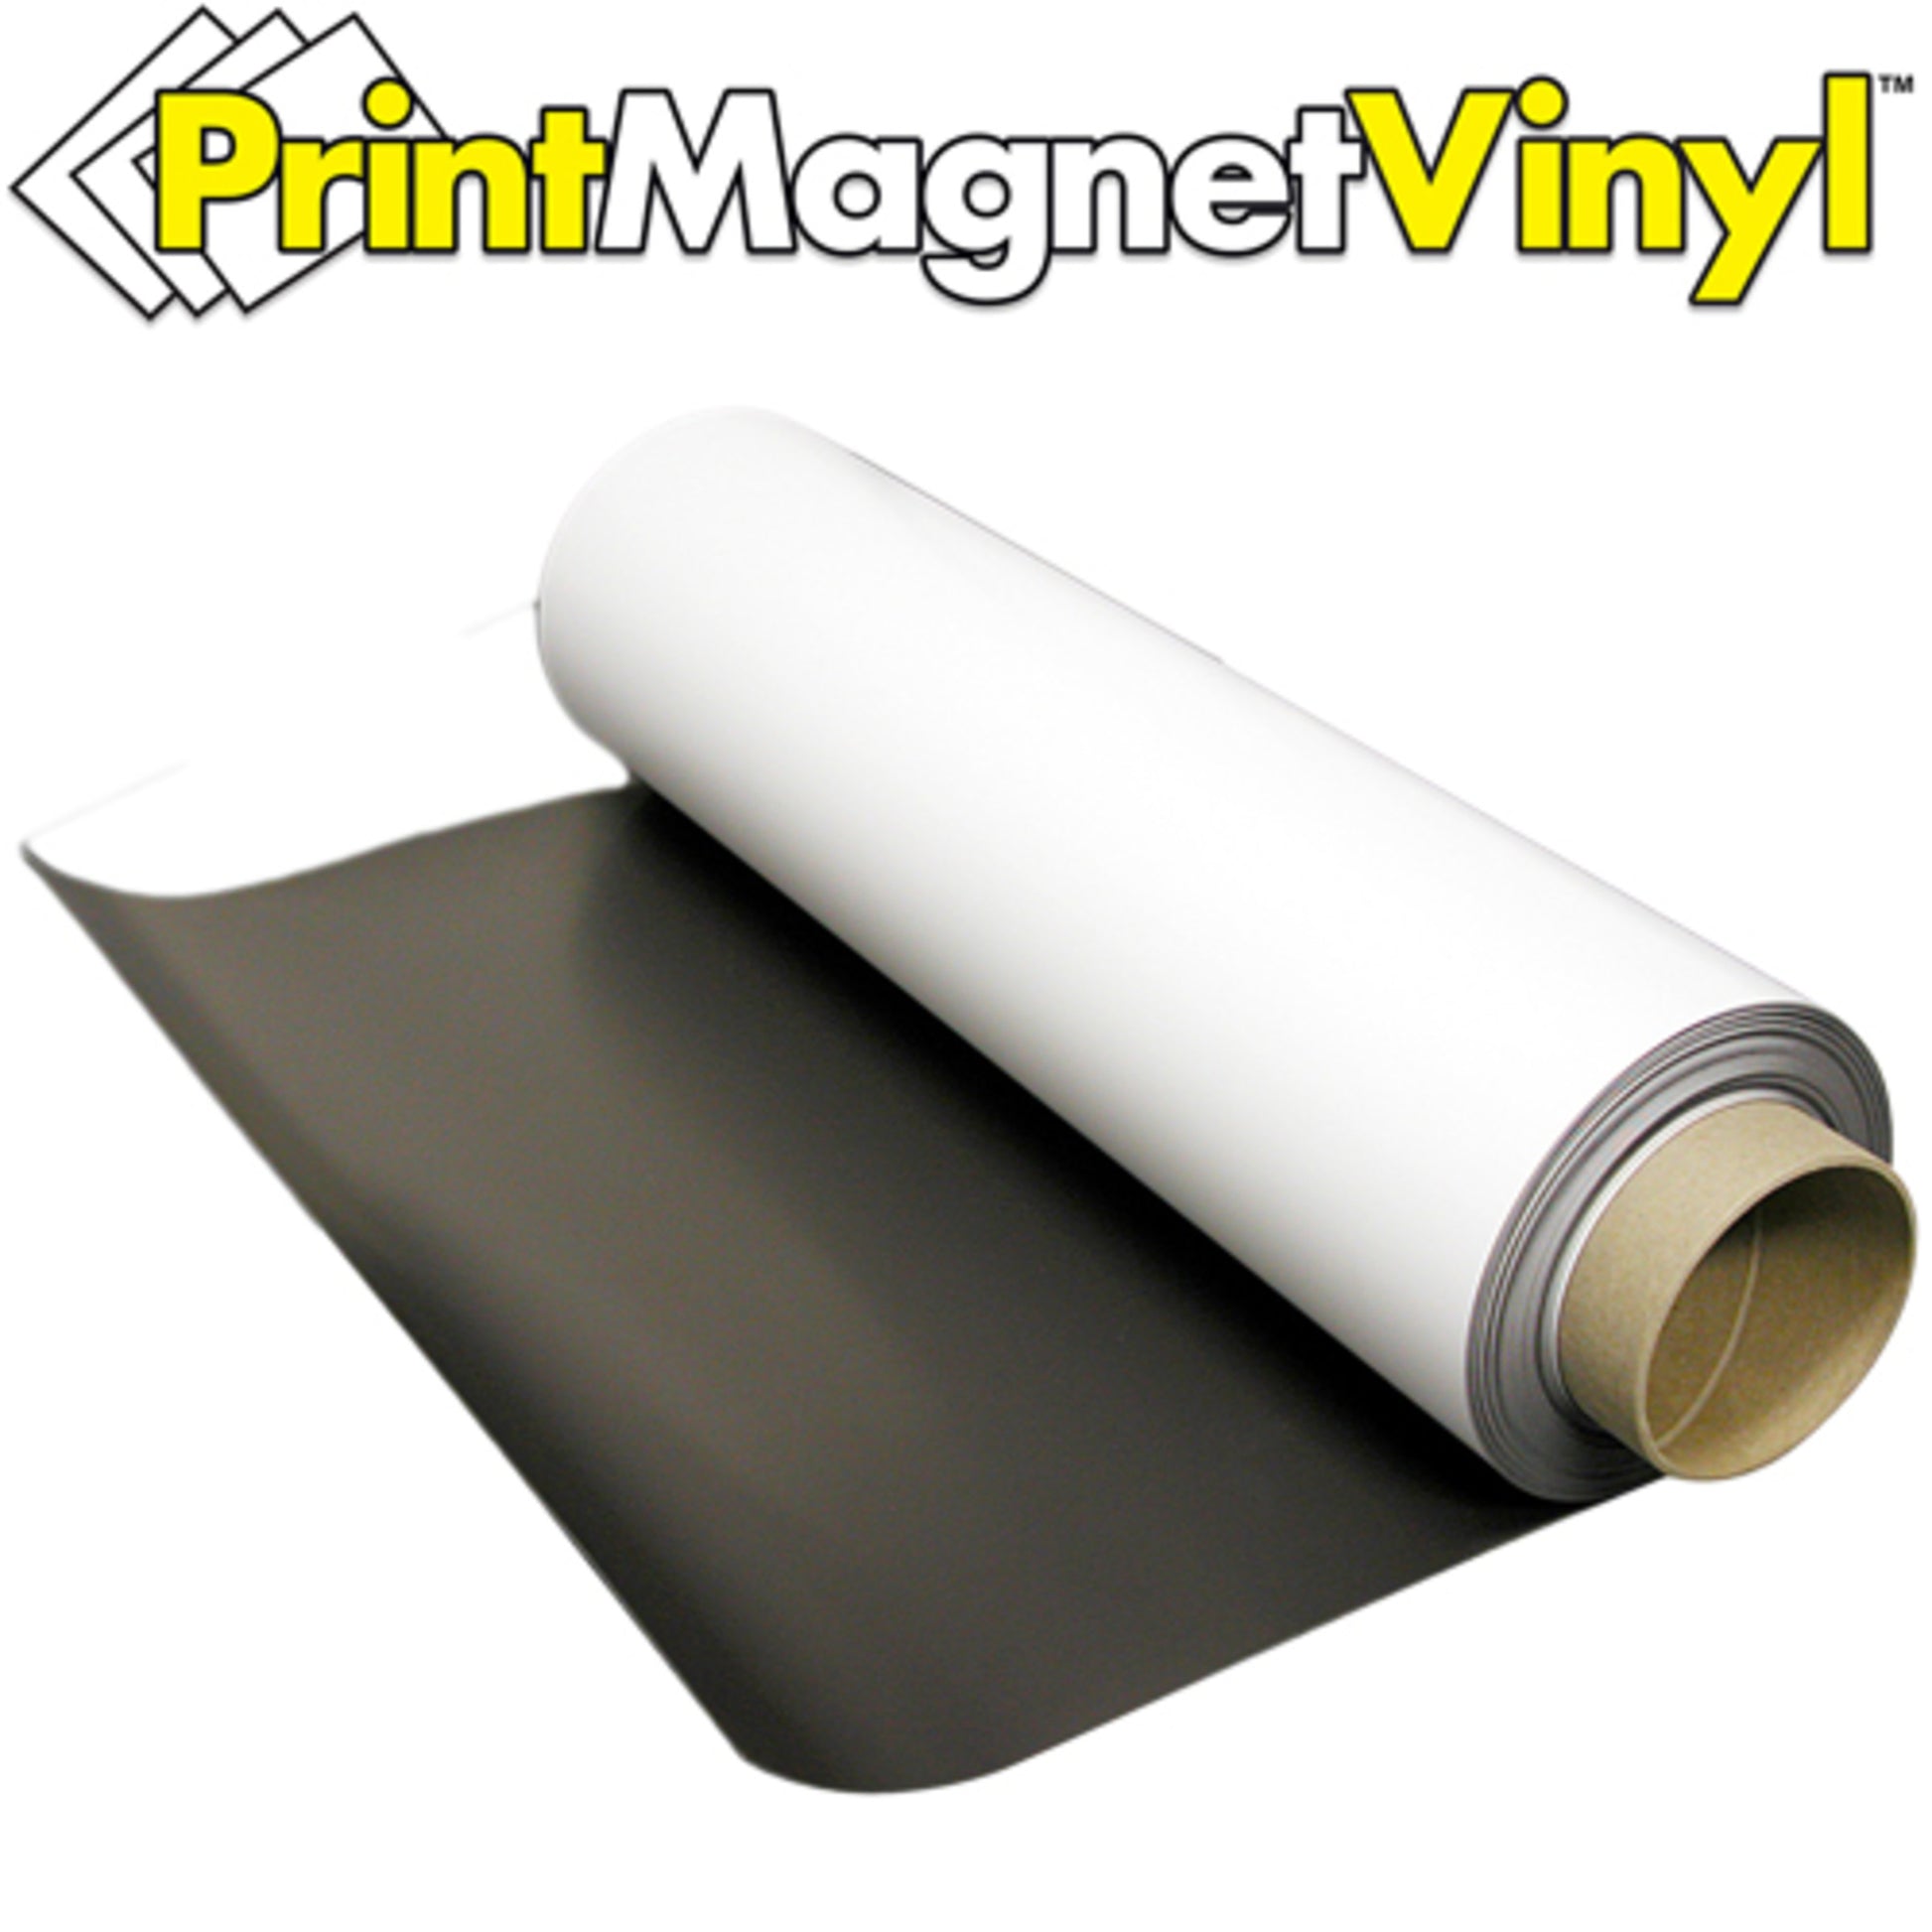 Load image into Gallery viewer, ZG4524GW25 PrintMagnetVinyl™ Flexible Magnetic Sheet - In Use